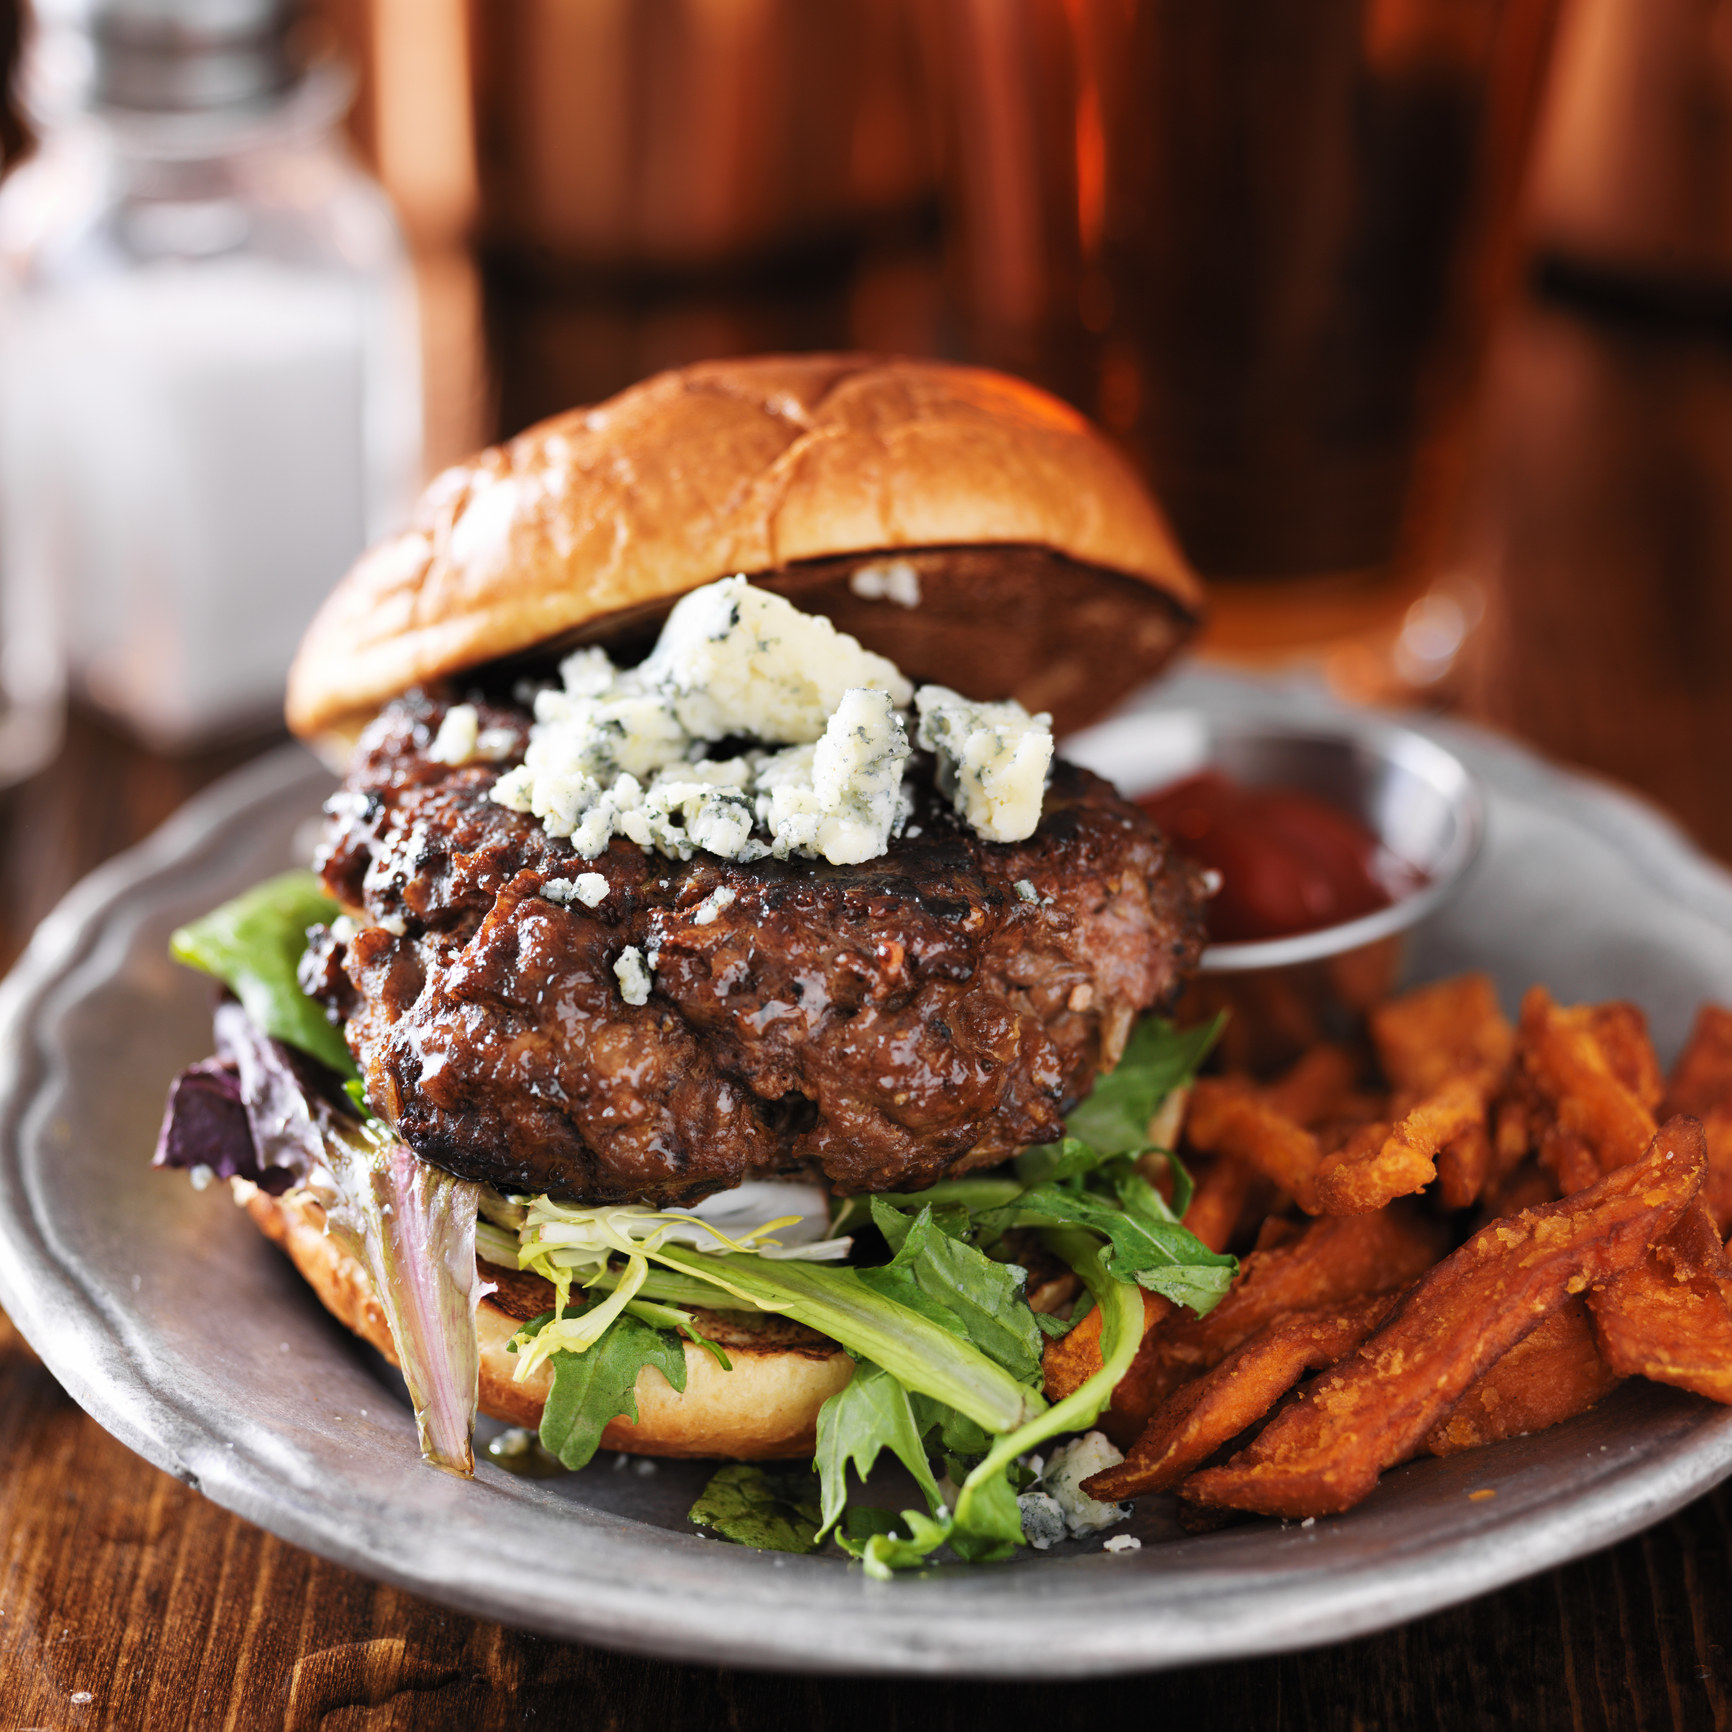 A gourmet burger with blue cheese